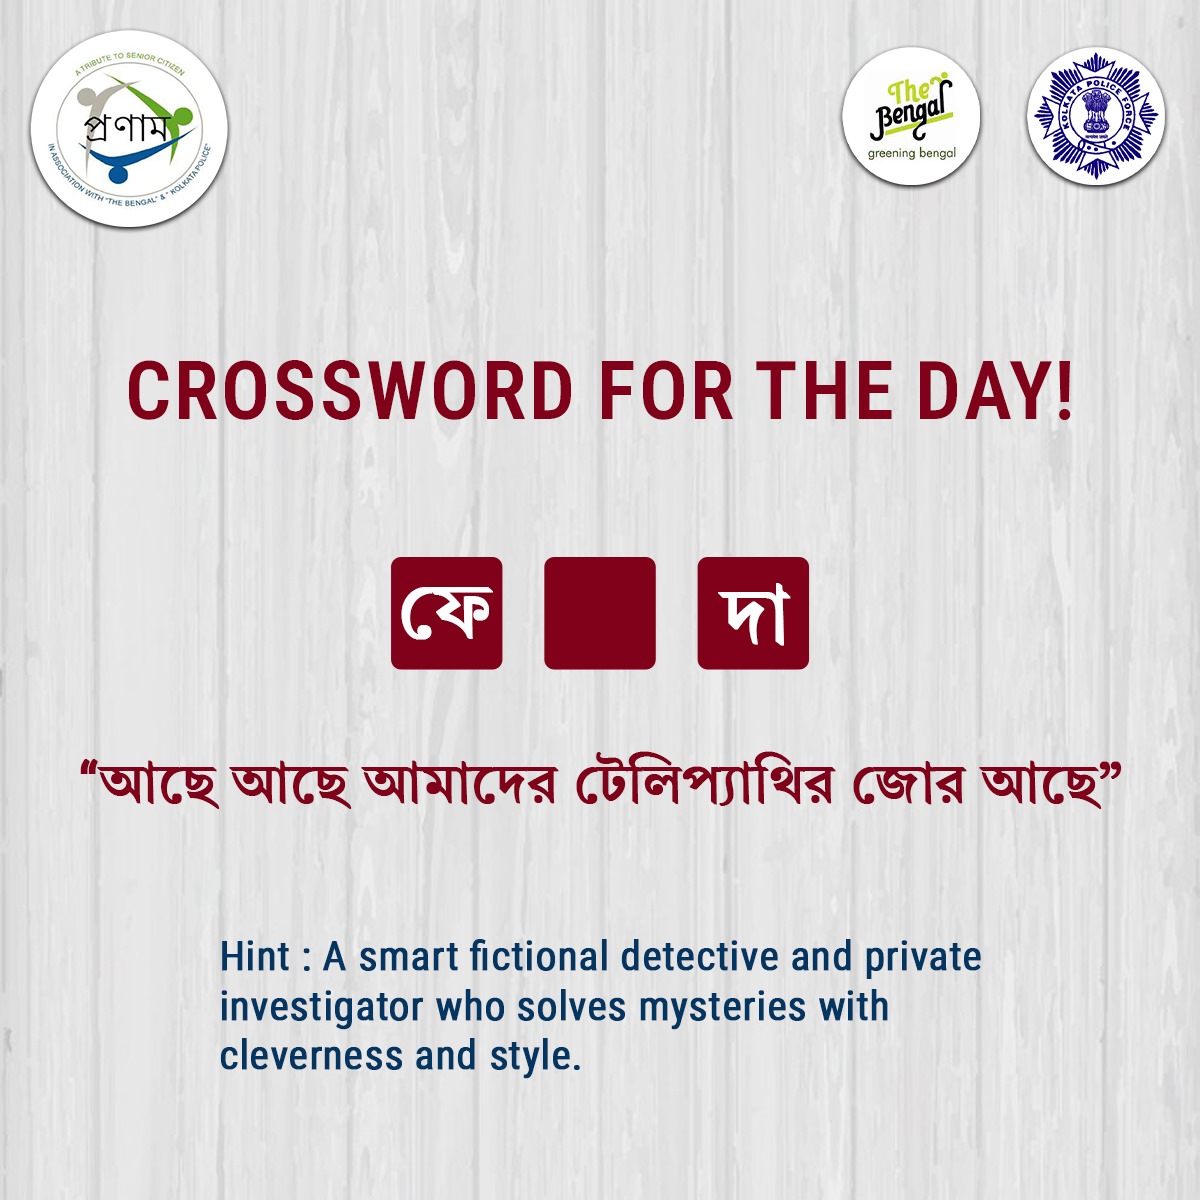 Exercise your mind with our crossword puzzle designed to keep mature minds entertained and engaged! Challenge yourself today for a fun mental workout.

#Pronam #TheBengal #KolkataPolice #CrosswordChallenge #MentalWorkout #BrainTeaser #WordPuzzle #MindGames #CrosswordFun